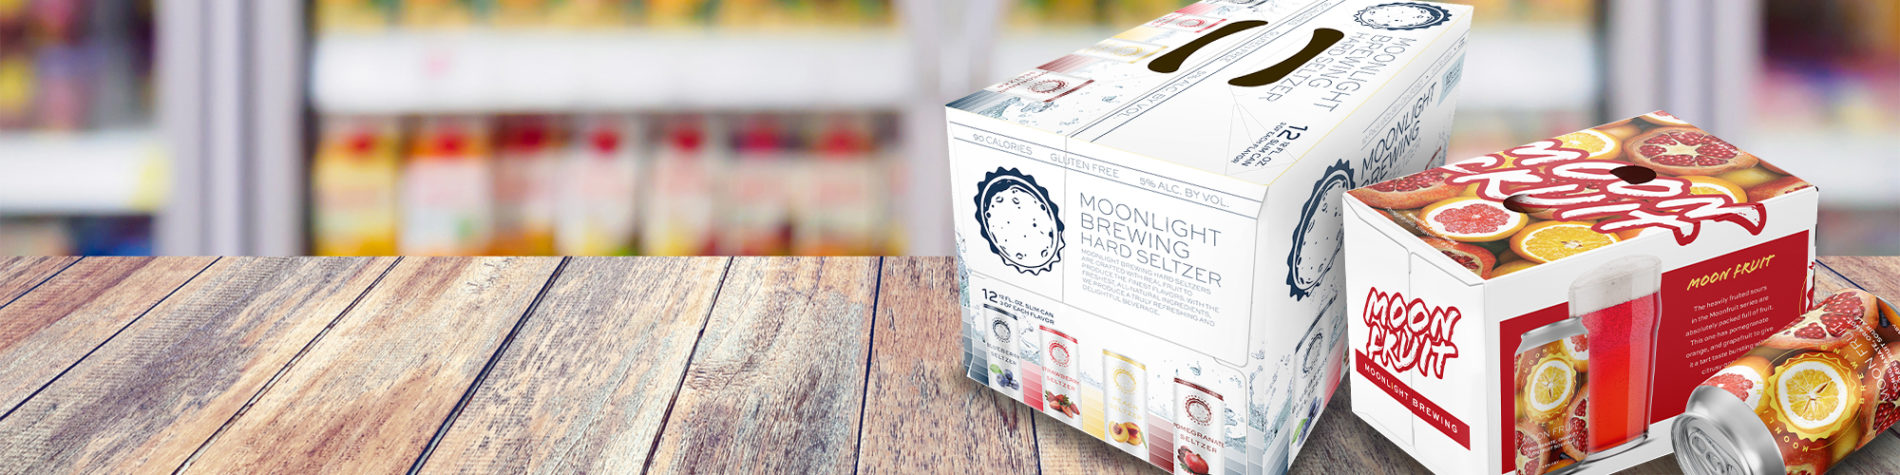 Beverage Boxes - Seltzers, Beer, Wine, Kombucha, and more